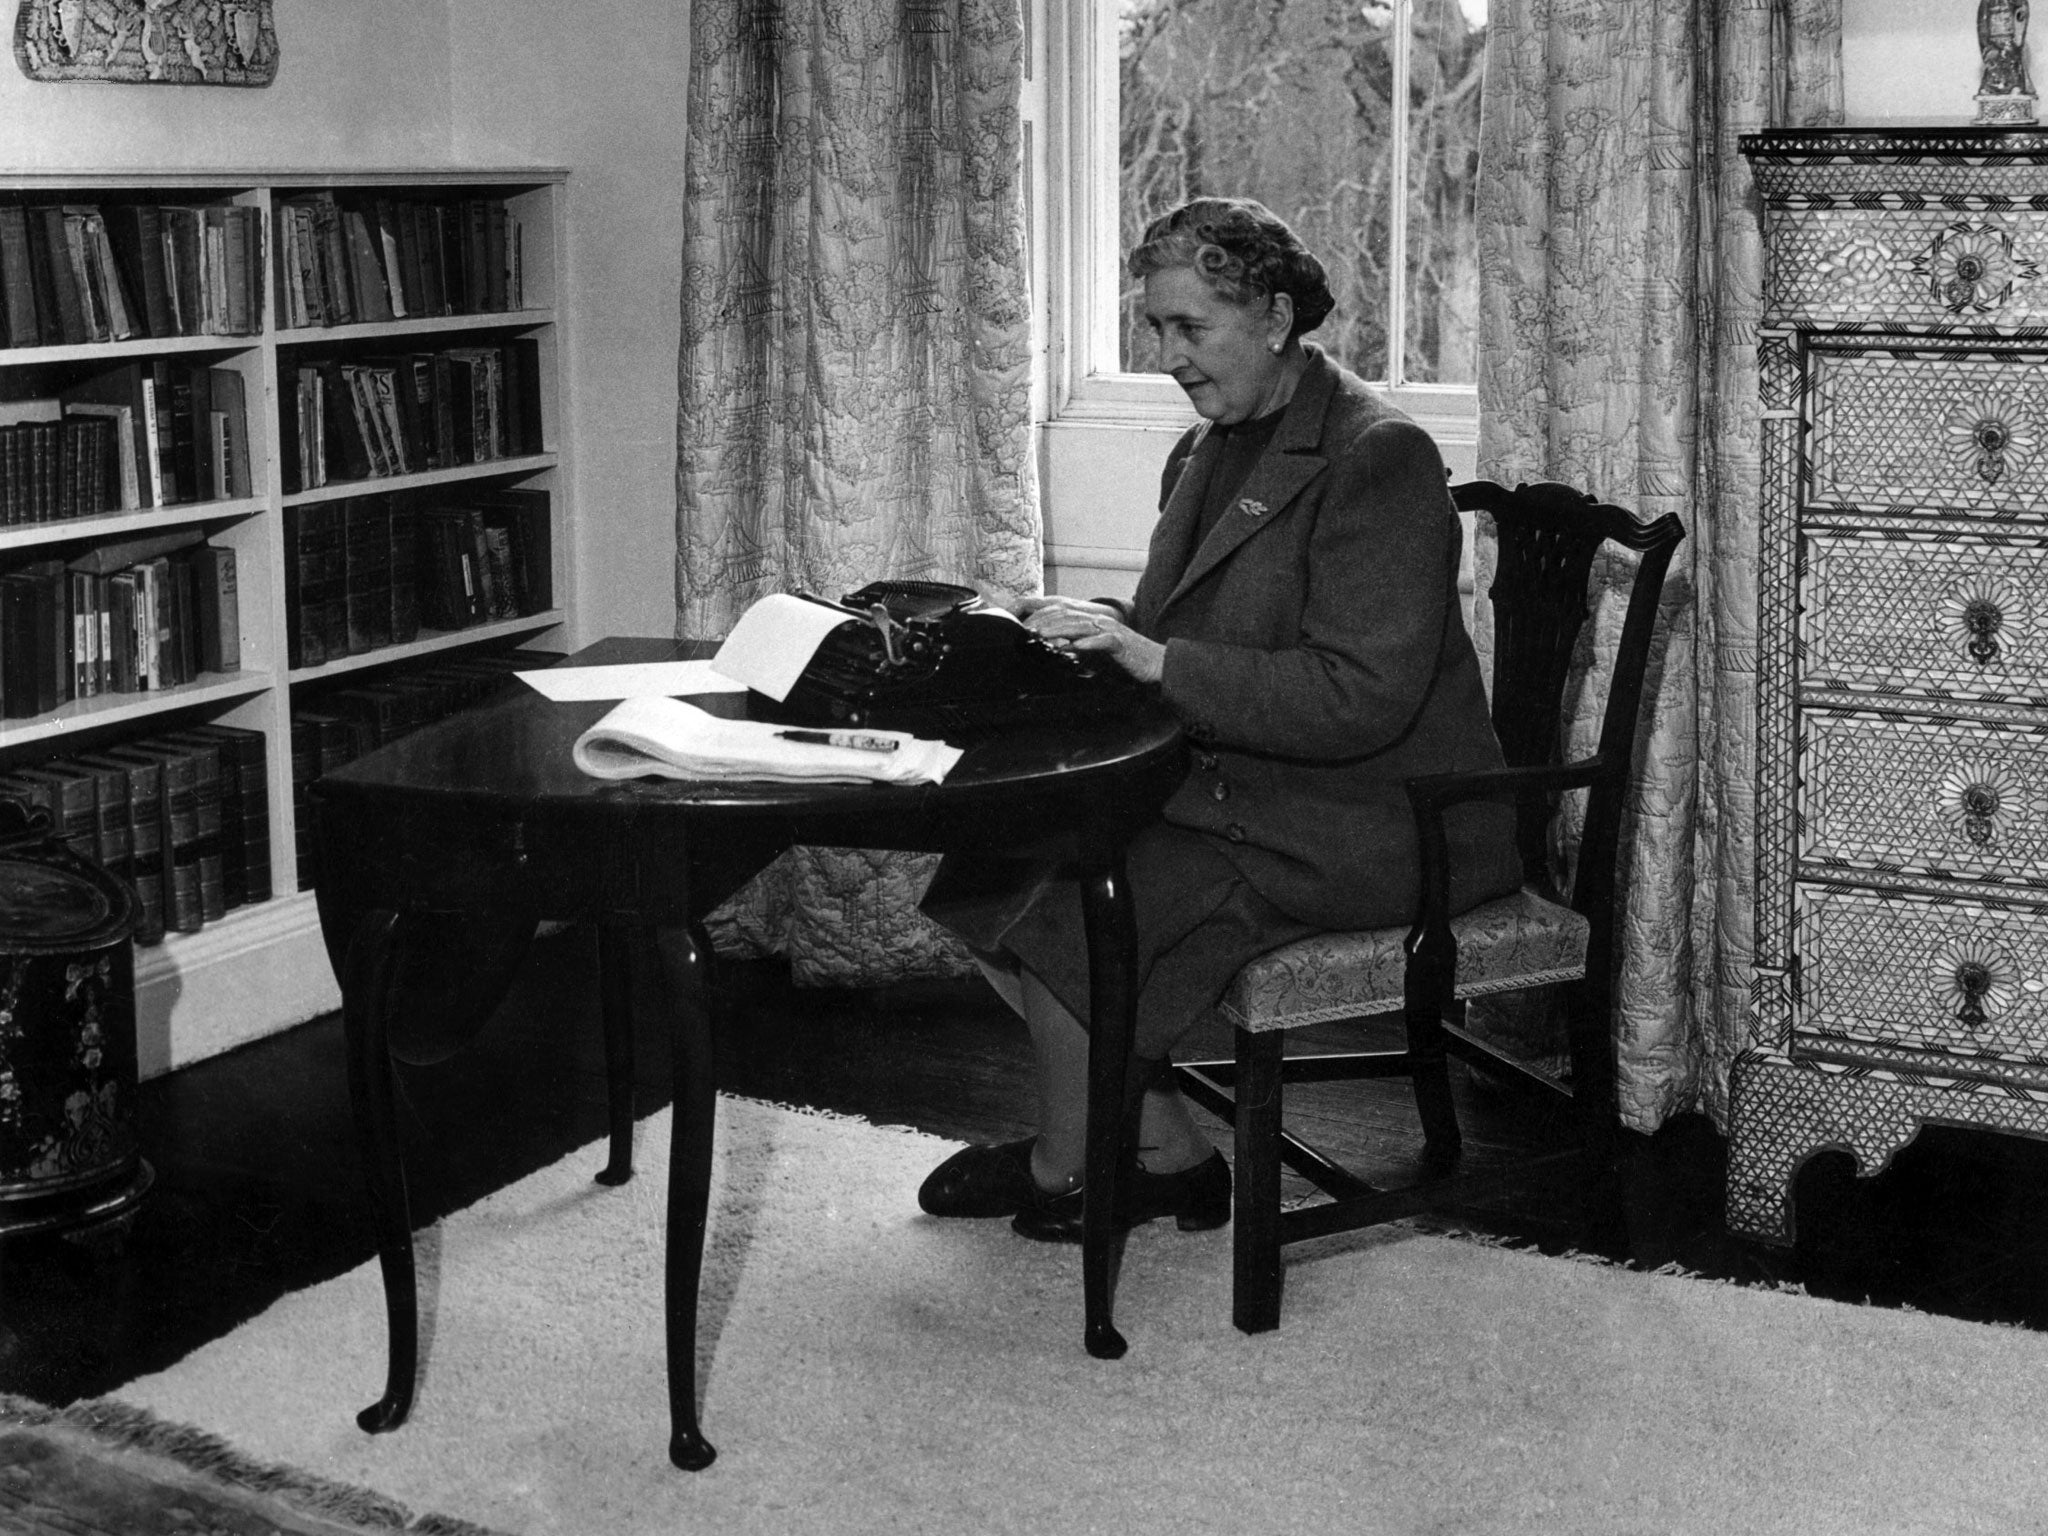 Dame Agatha Christie, at work on a typewriter in March 1946 in her home, Greenway House, in Devonshire.